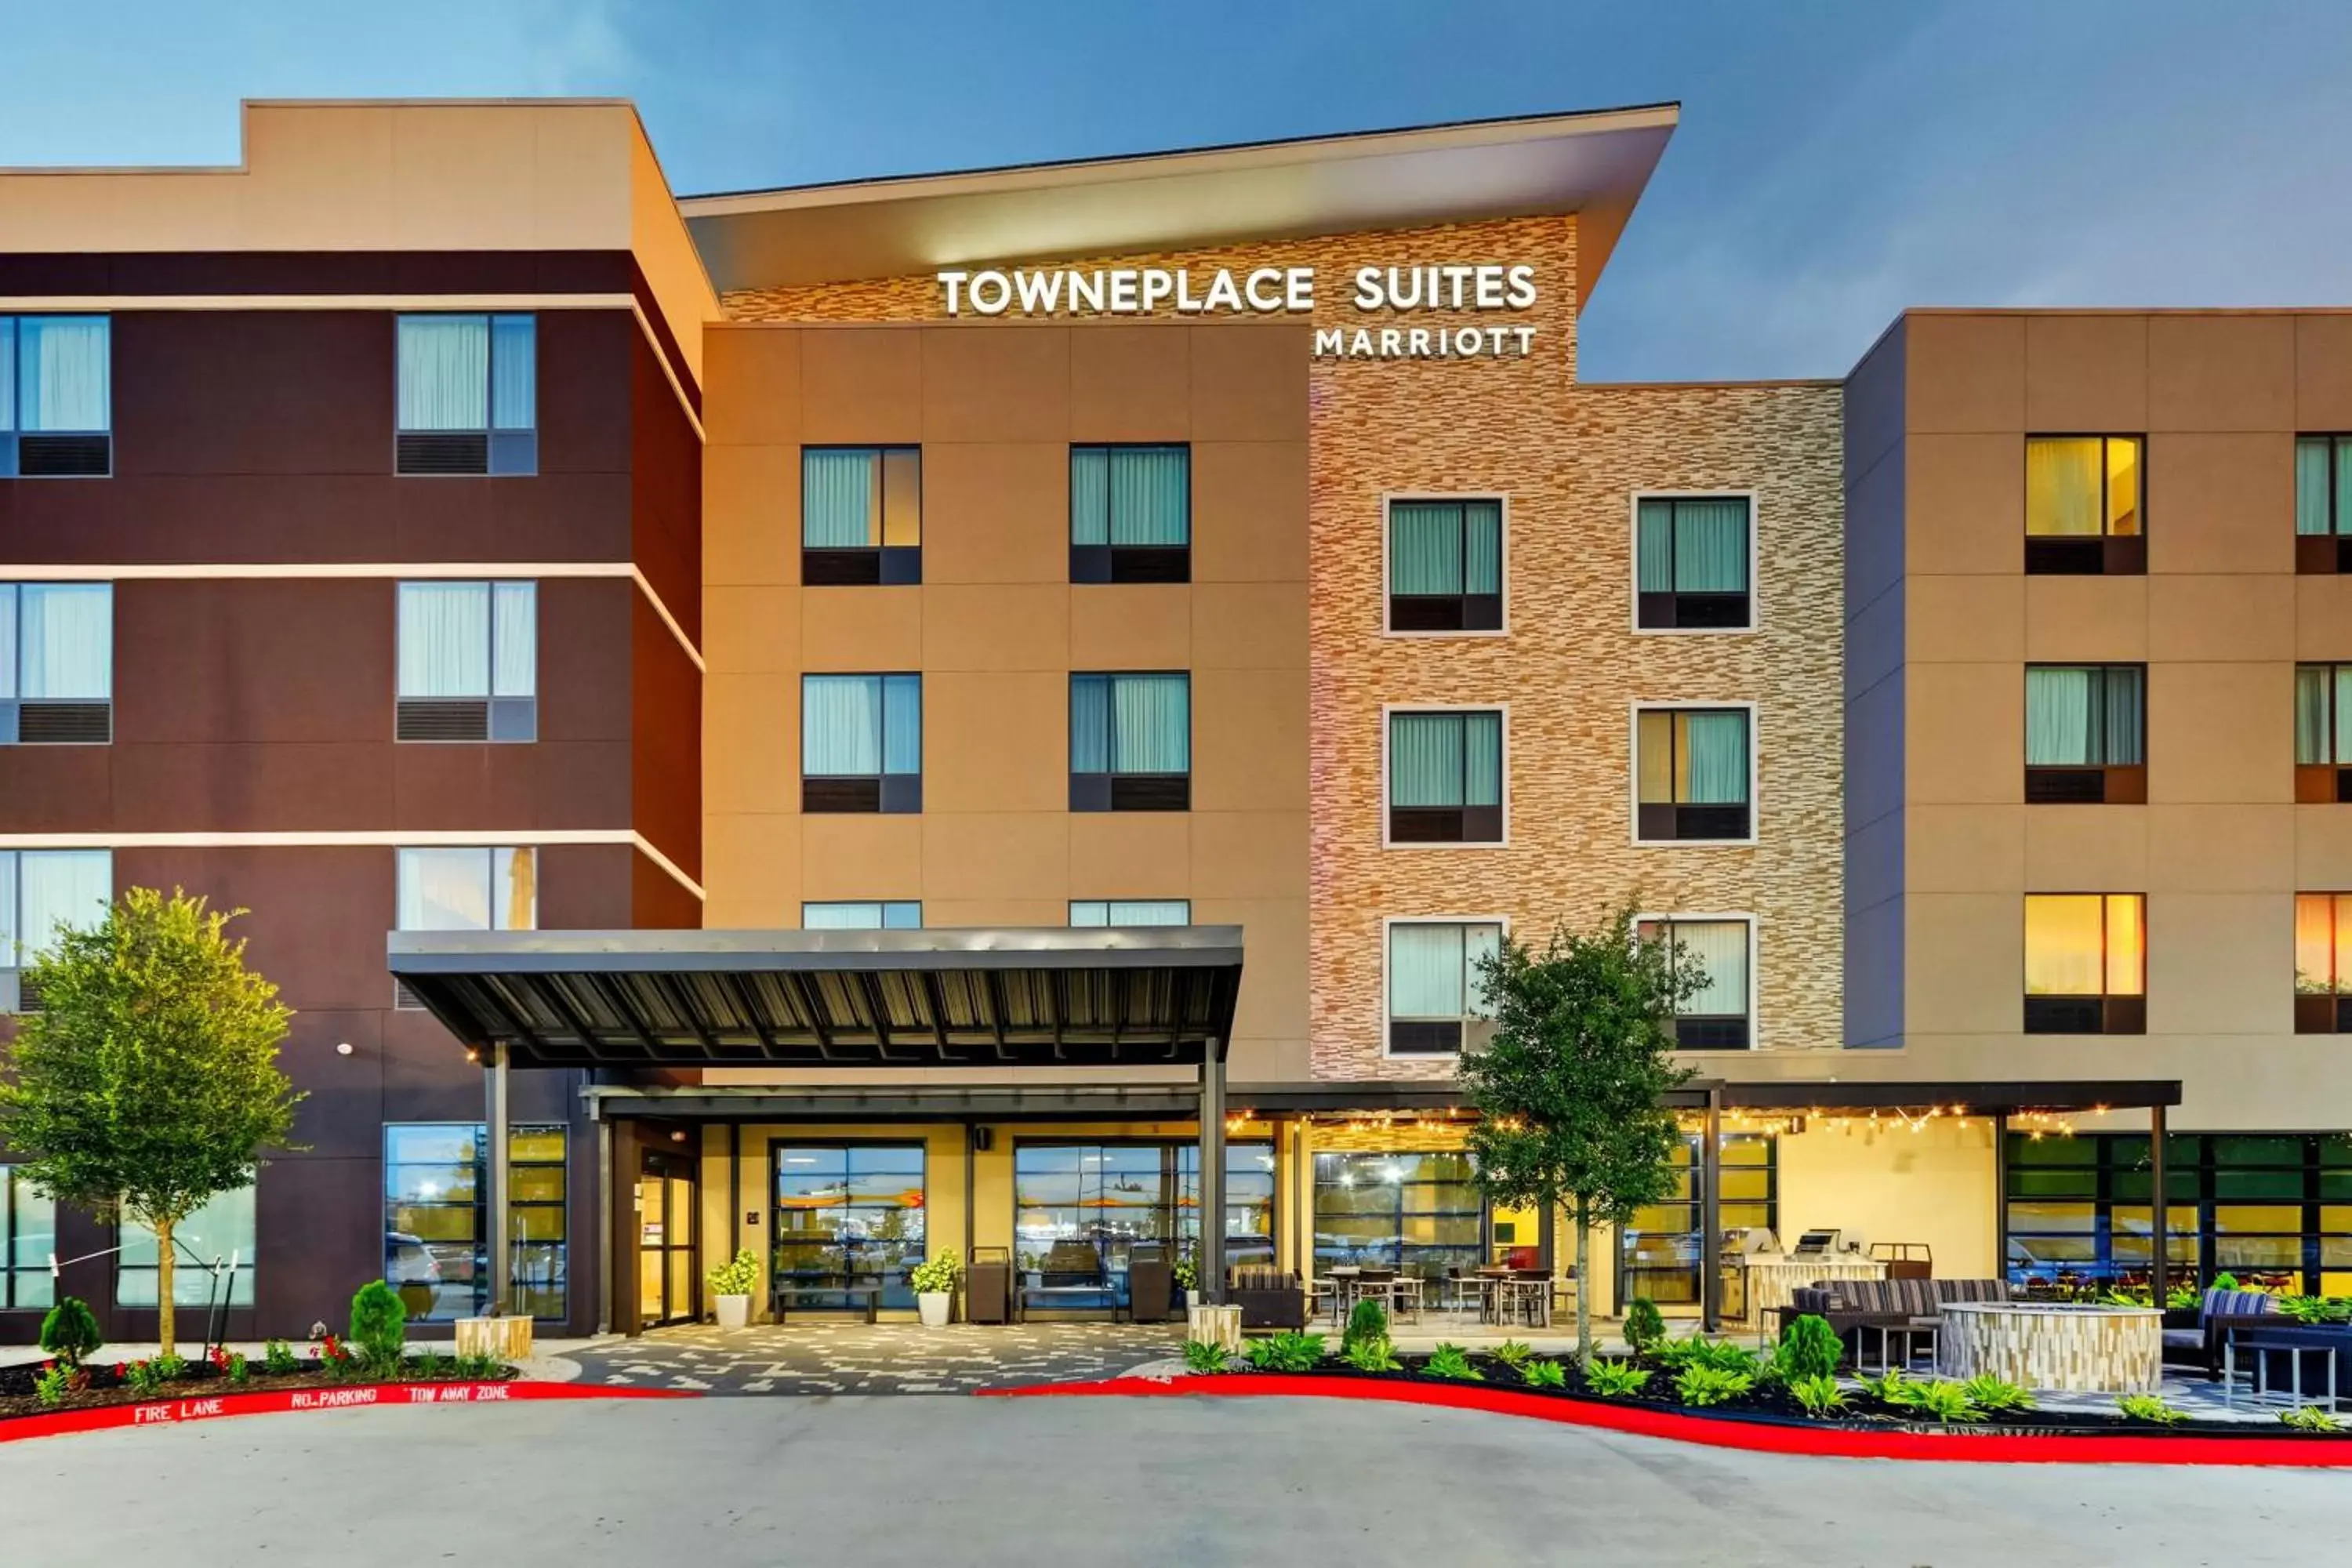 Property Building in TownePlace Suites by Marriott Houston Northwest Beltway 8